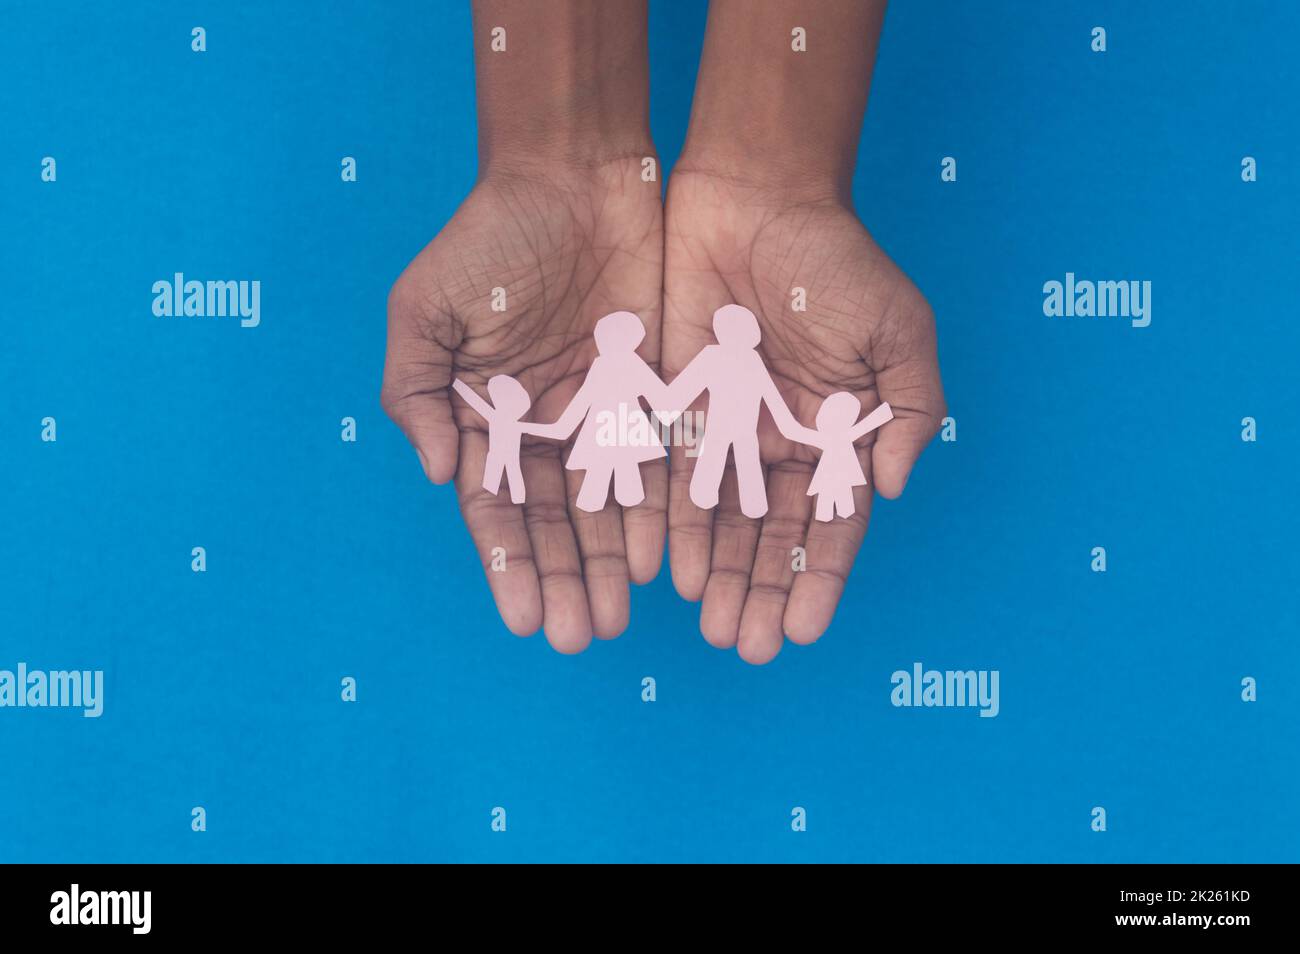 Hand holding family figure cutout top view. World health day Protection against domestic violence, healthcare and medical background. Foster care, homeless support and social distancing concept. Stock Photo